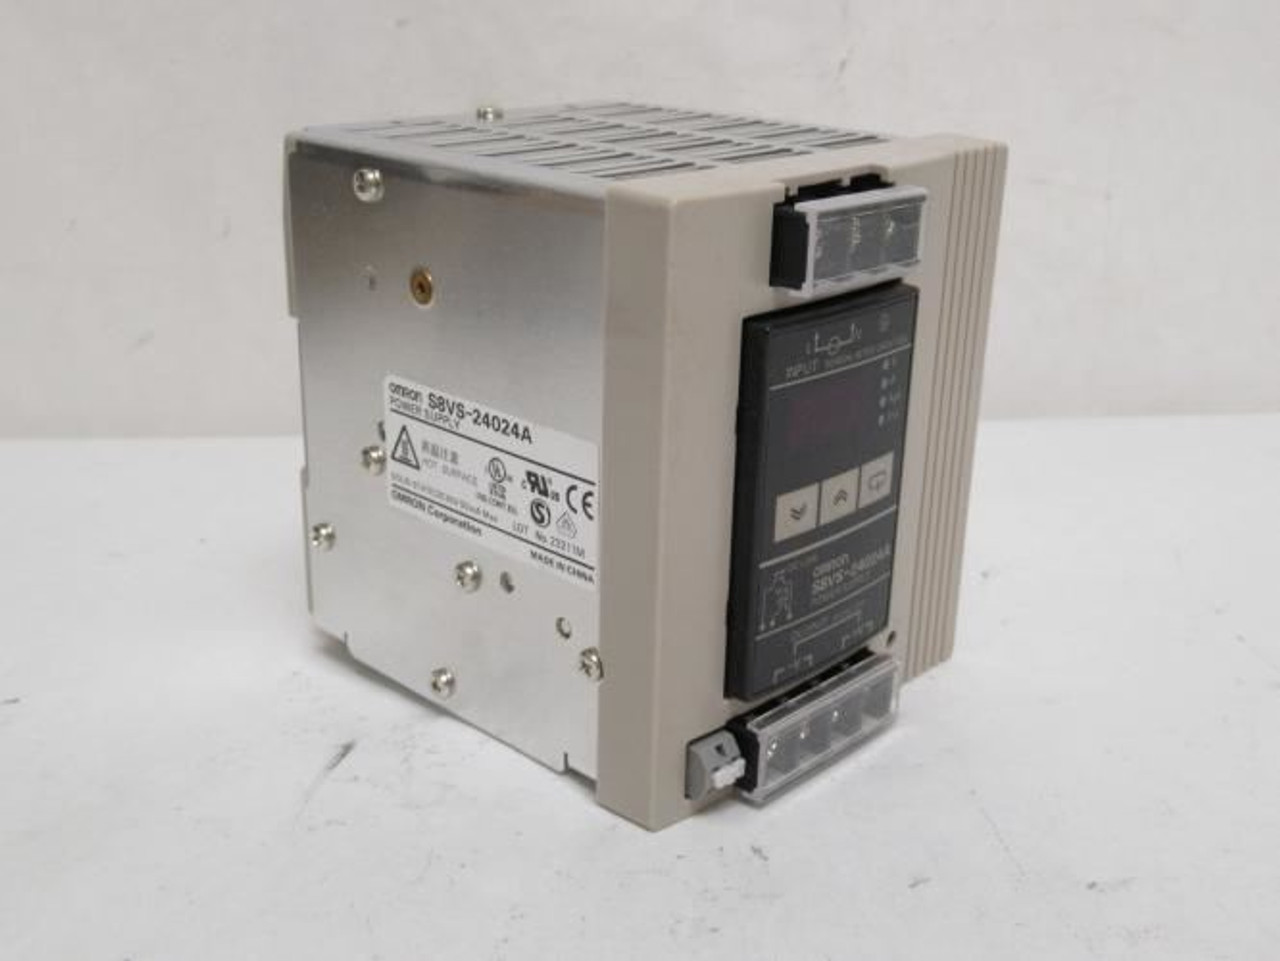 Omron S8VS-24024A; Power Supply; 100-240VAC In; 24VDC Out